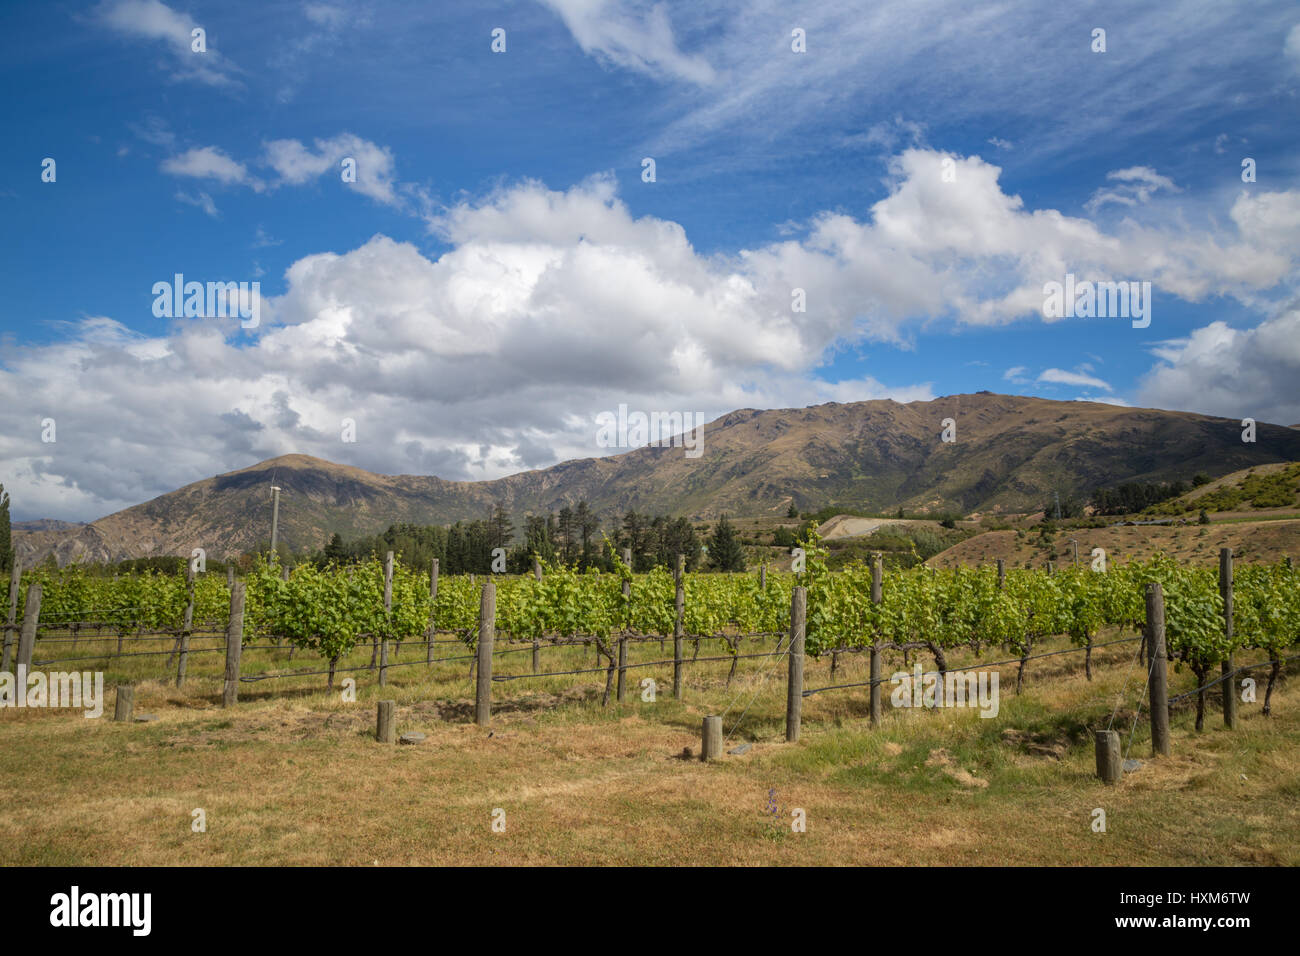 View from the winery in Central Otago, South Island, New Zealand. Green vineyard with mountains and hills on the background under a blue sky Stock Photo